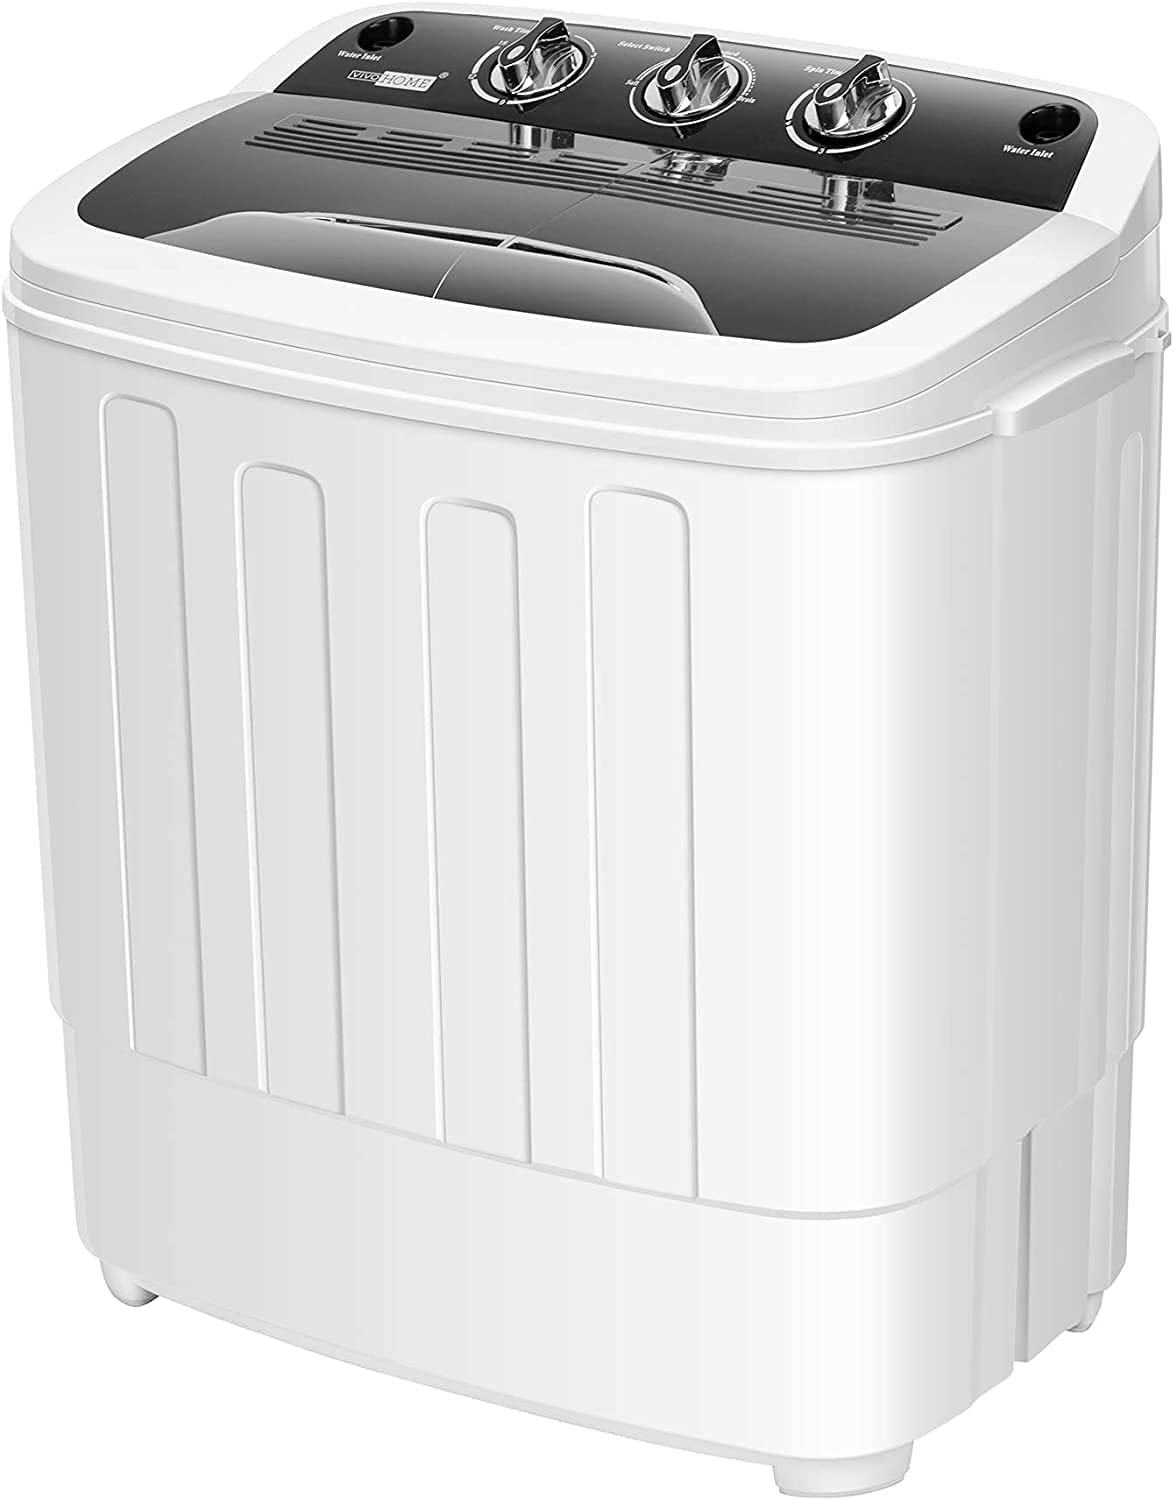 VIVOHOME Electric Portable 2-in-1 Twin Tub Mini Laundry Washer